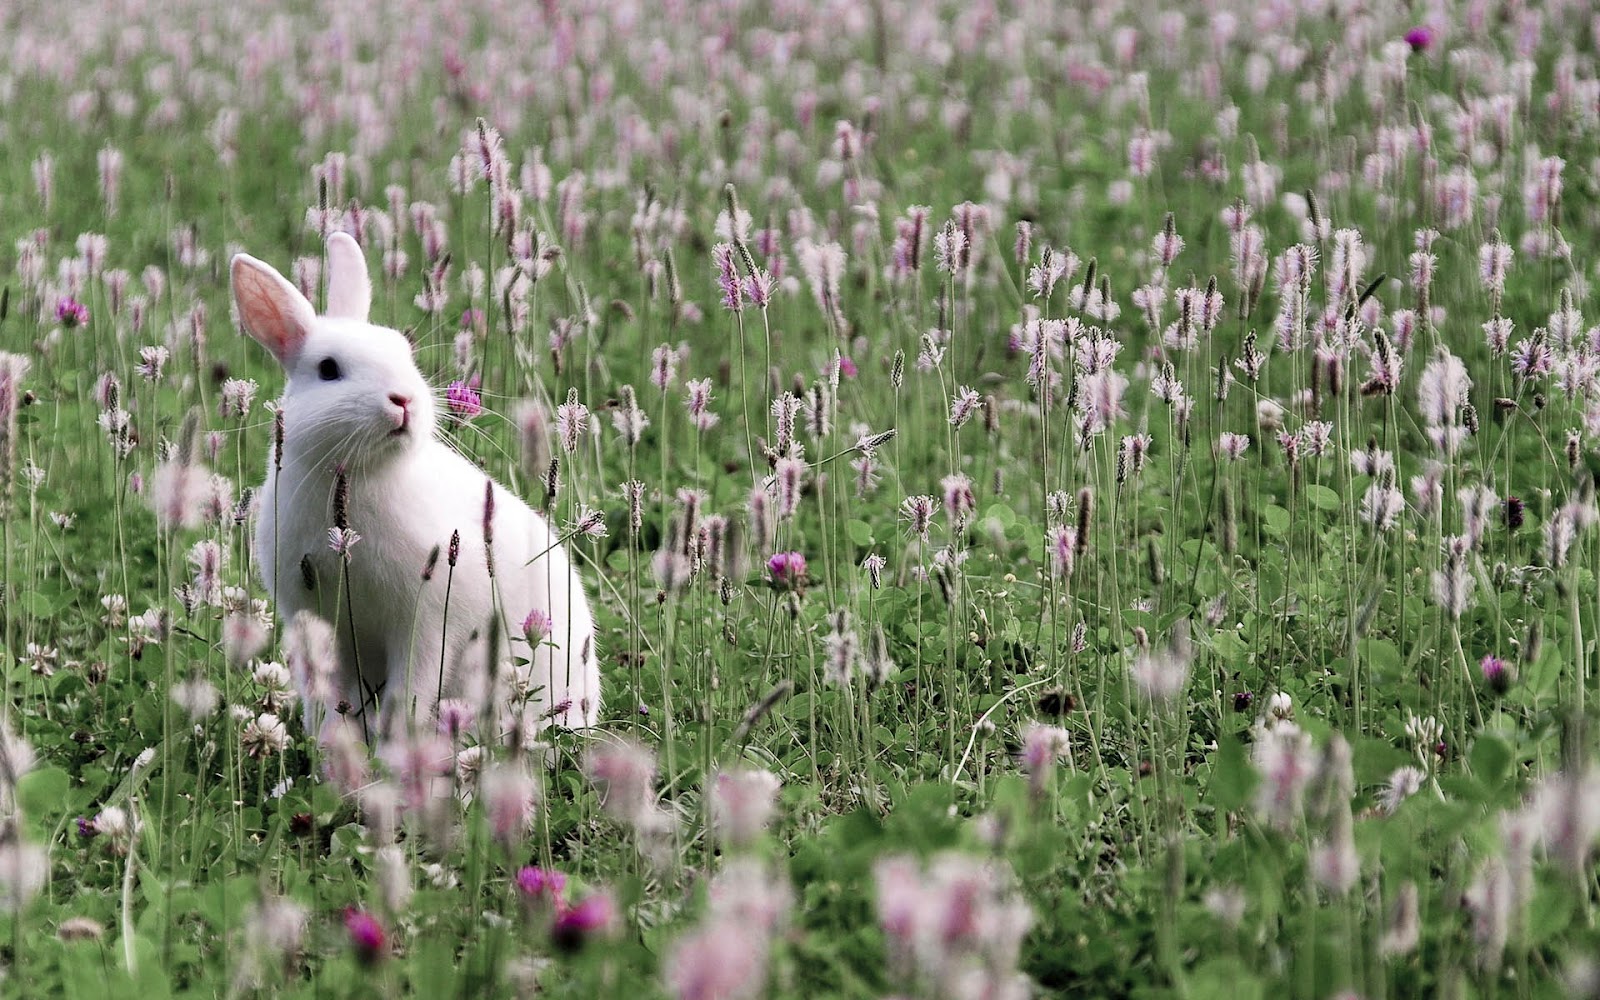 Rabbits Wallpaper With A White Rabbit And Flowers Grass Background